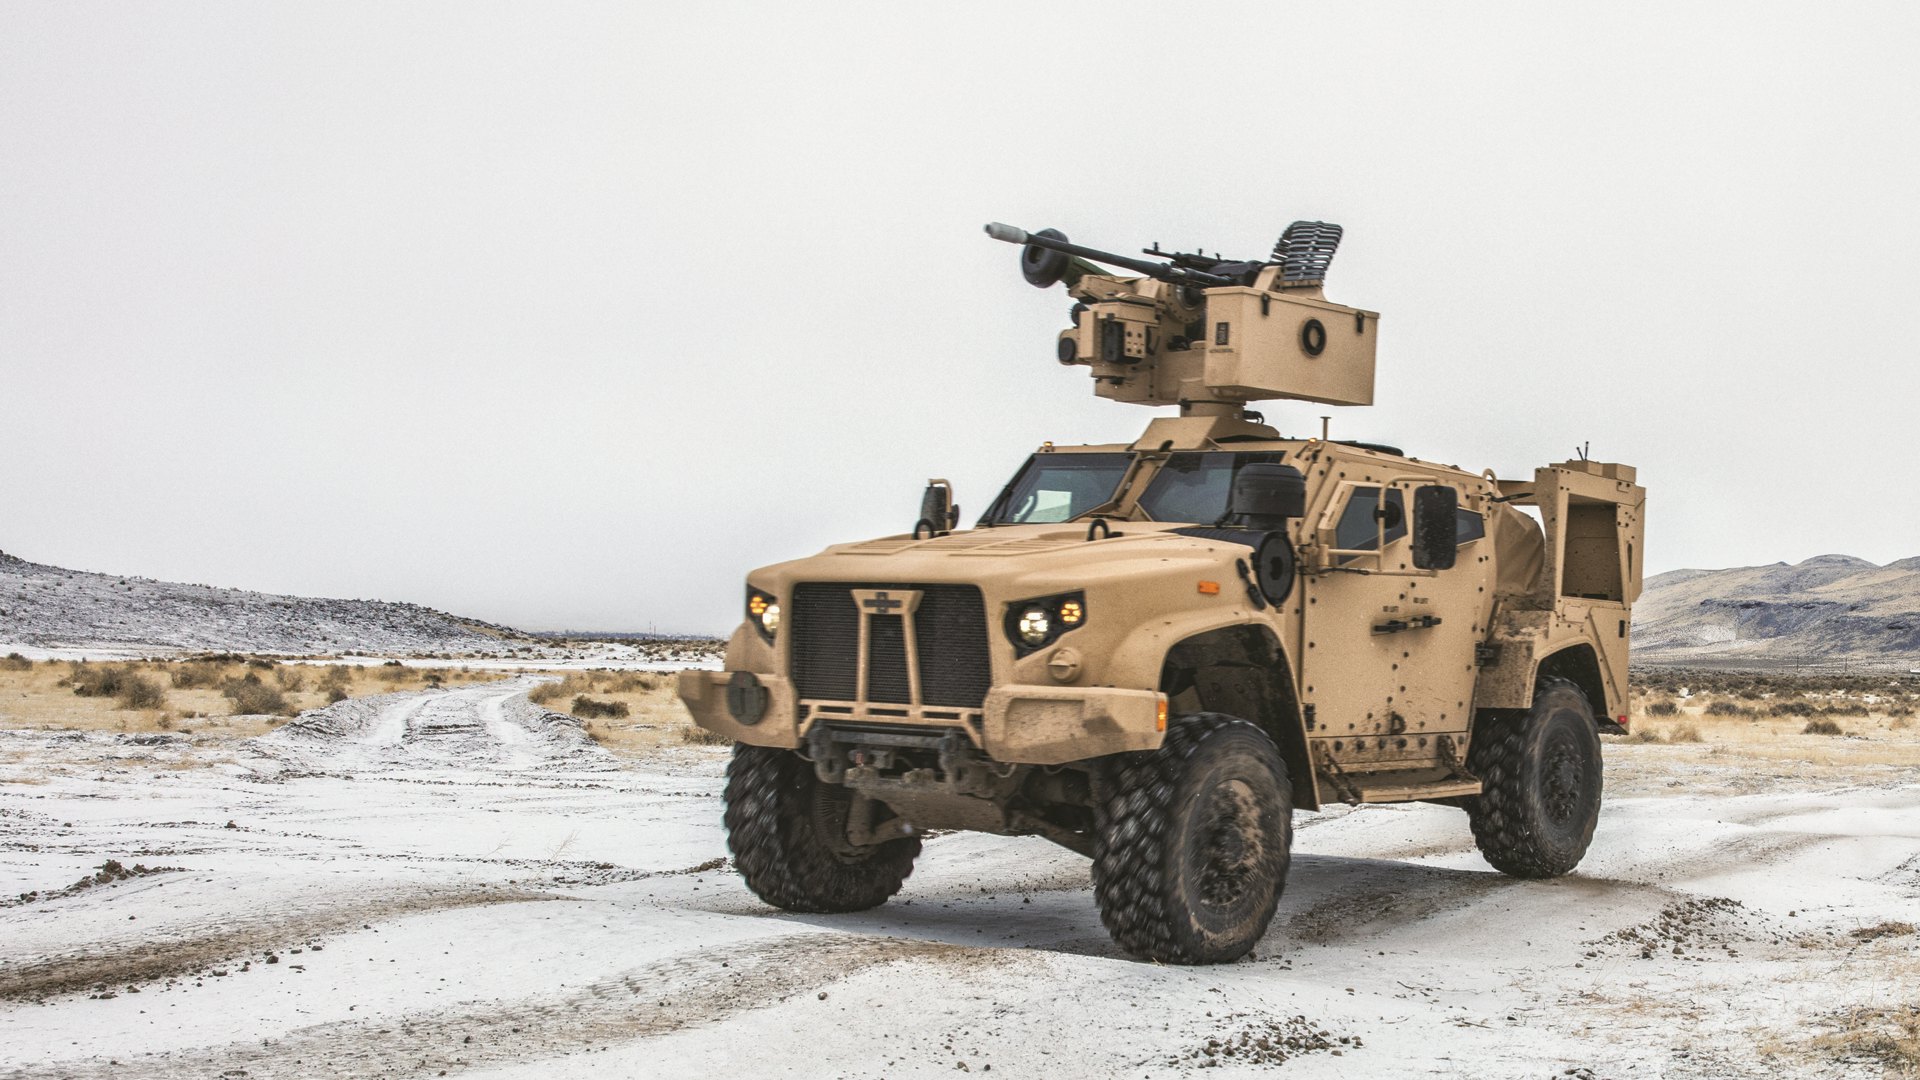 US special ops to get vehicle converter kits for the Arctic by early 2023